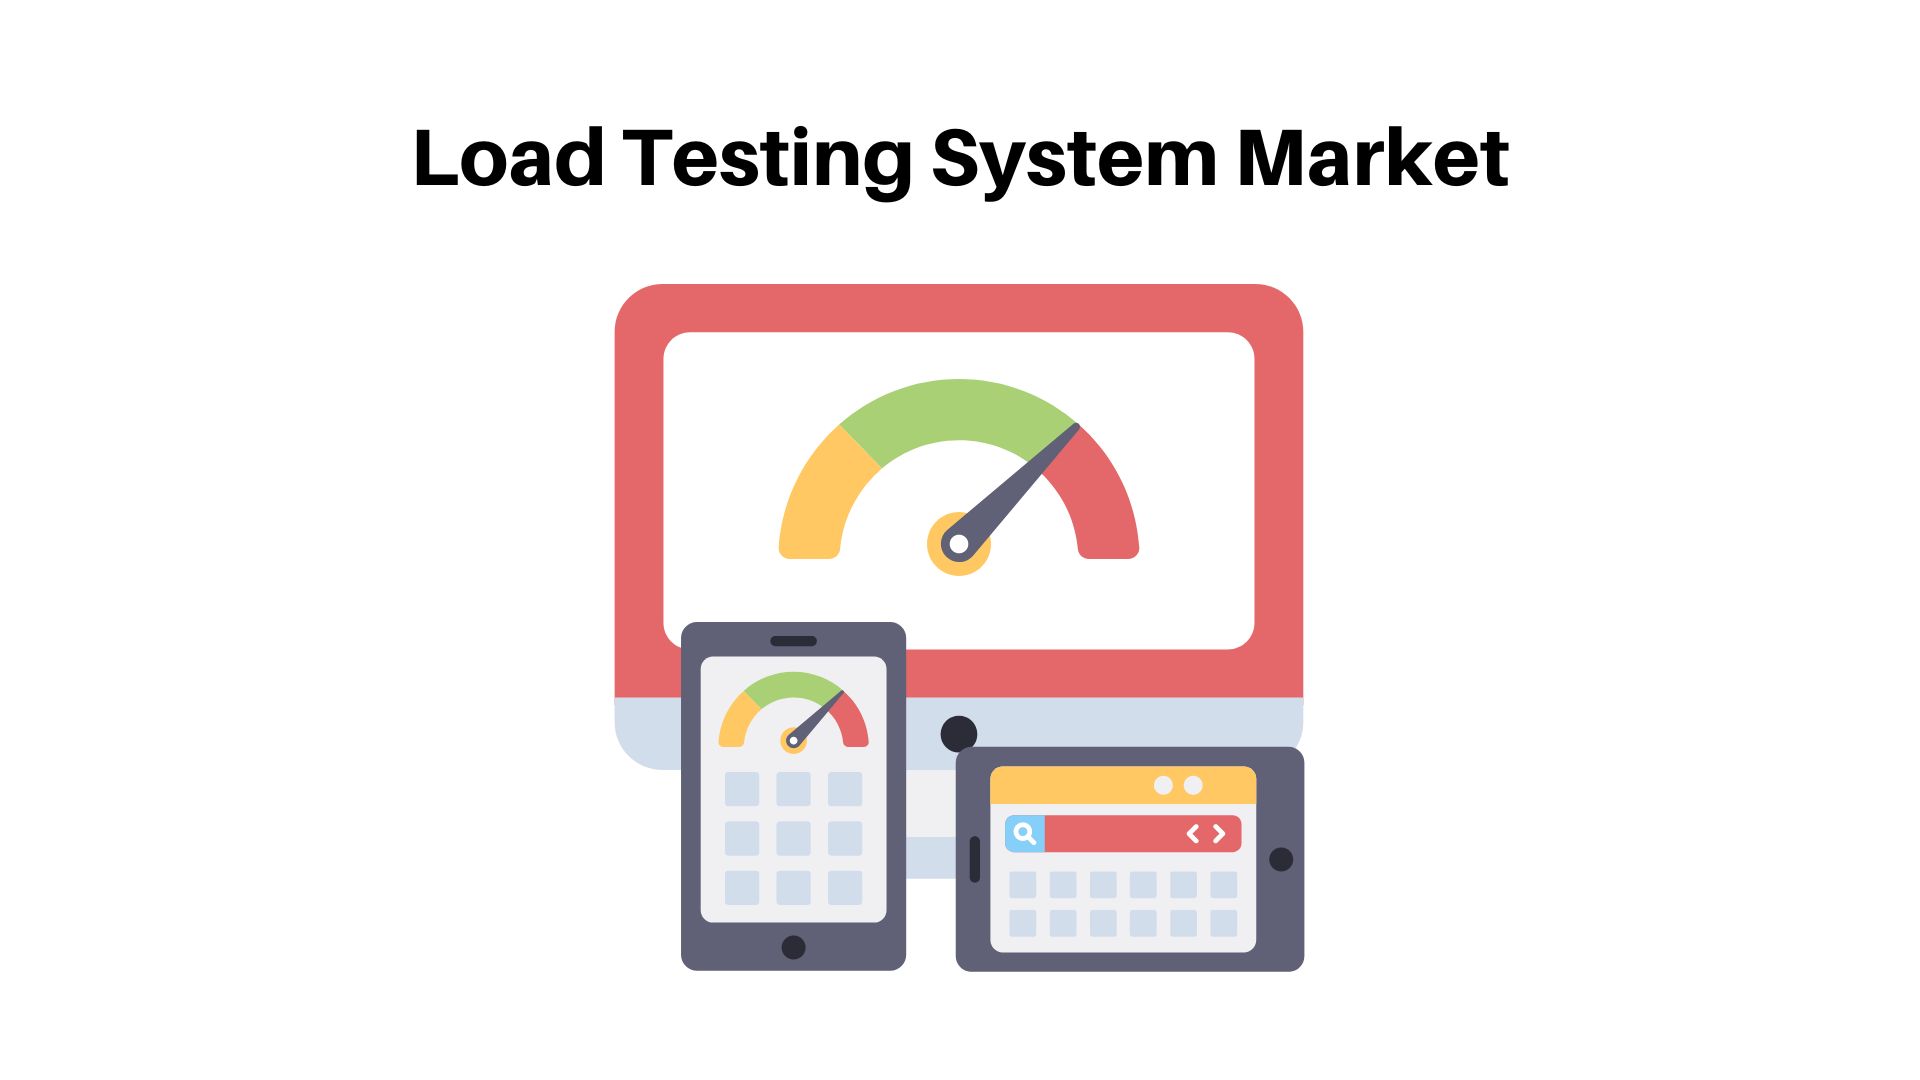 Load Testing System Market Will Reach USD 730.50 million by 2032 | CAGR 12% From 2022-2032